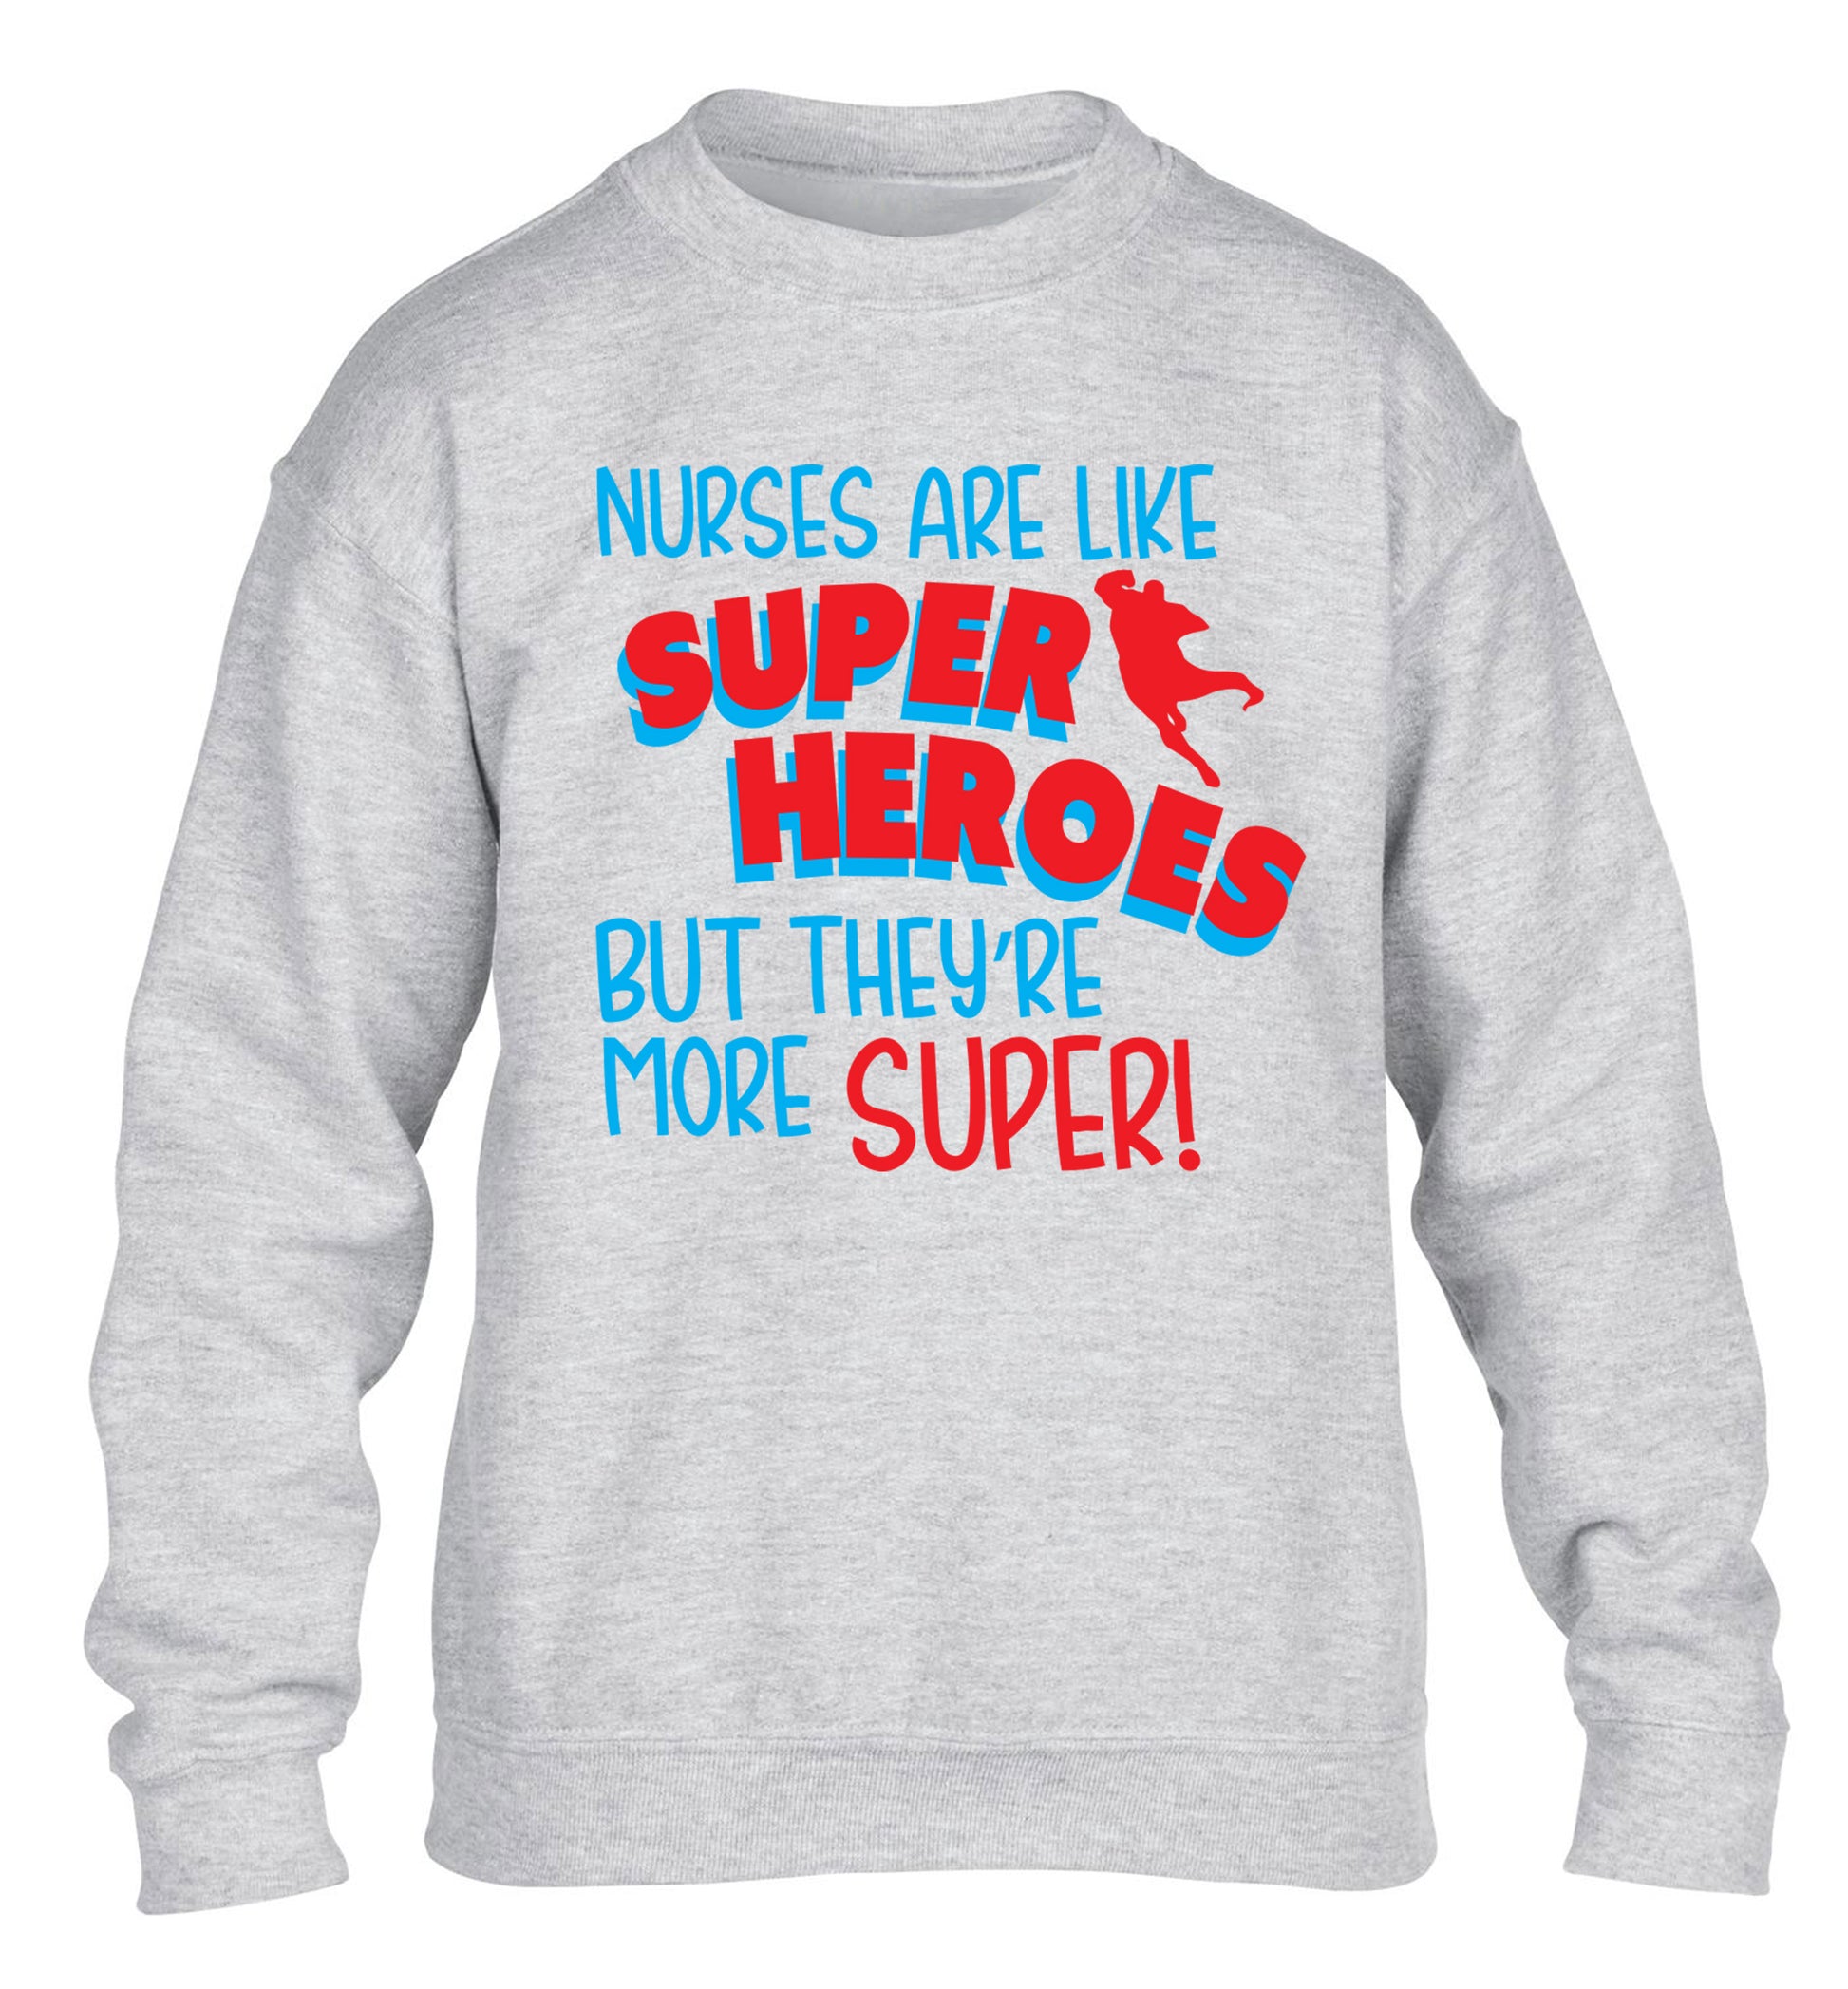 Nurses are like superheros but they're more super children's grey sweater 12-13 Years